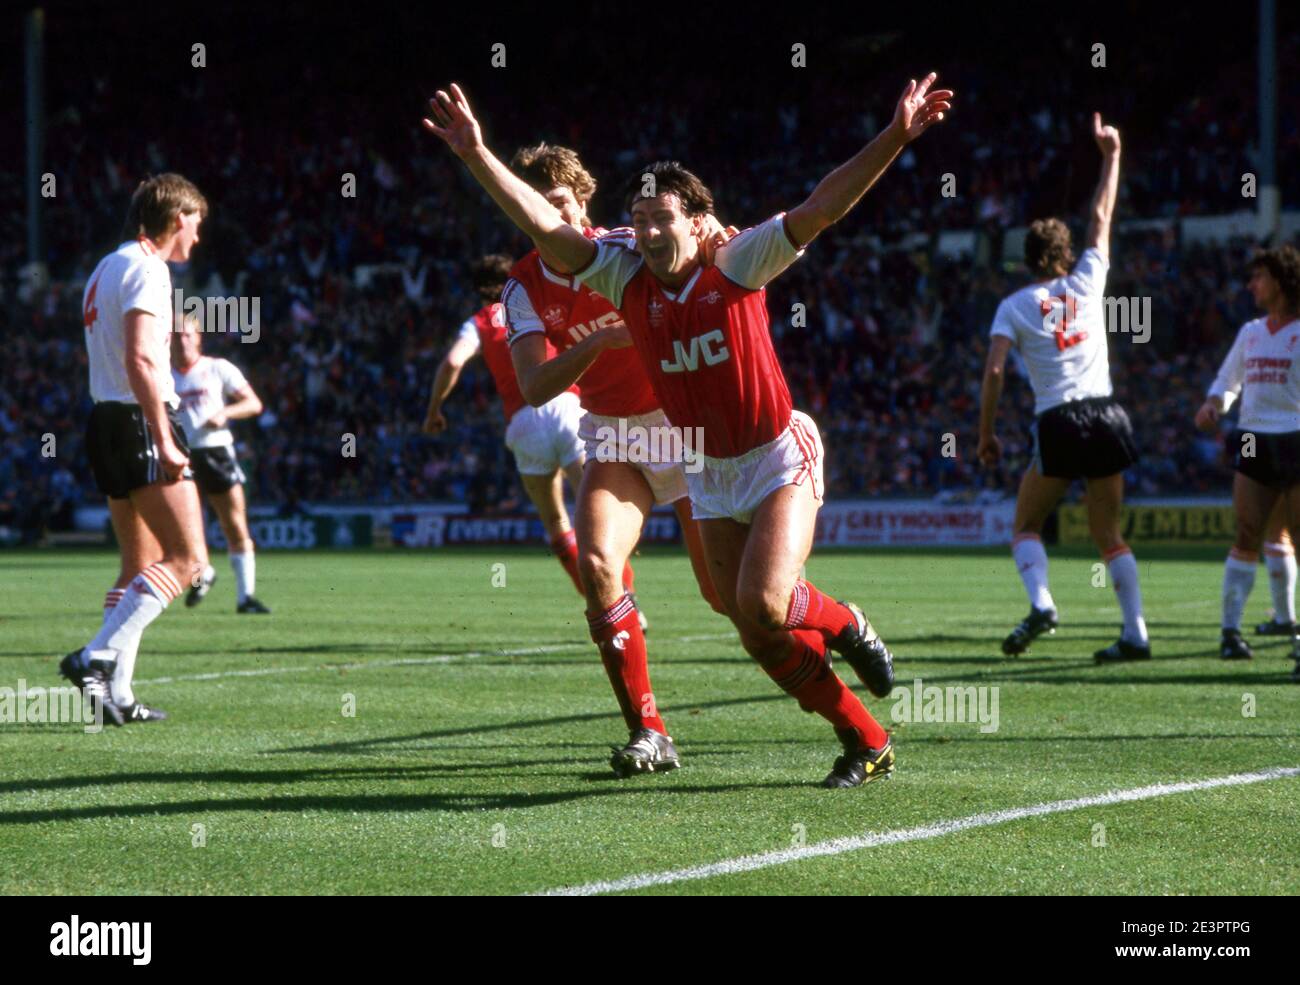 Charlie Nicholas of Arsenal  scores one of his two goals during the 2-1 win over Liverpool in the Littlewoods League Cup Final at Wembley Stadium 5 April 1987  Photograph by Tony Henshaw Stock Photo